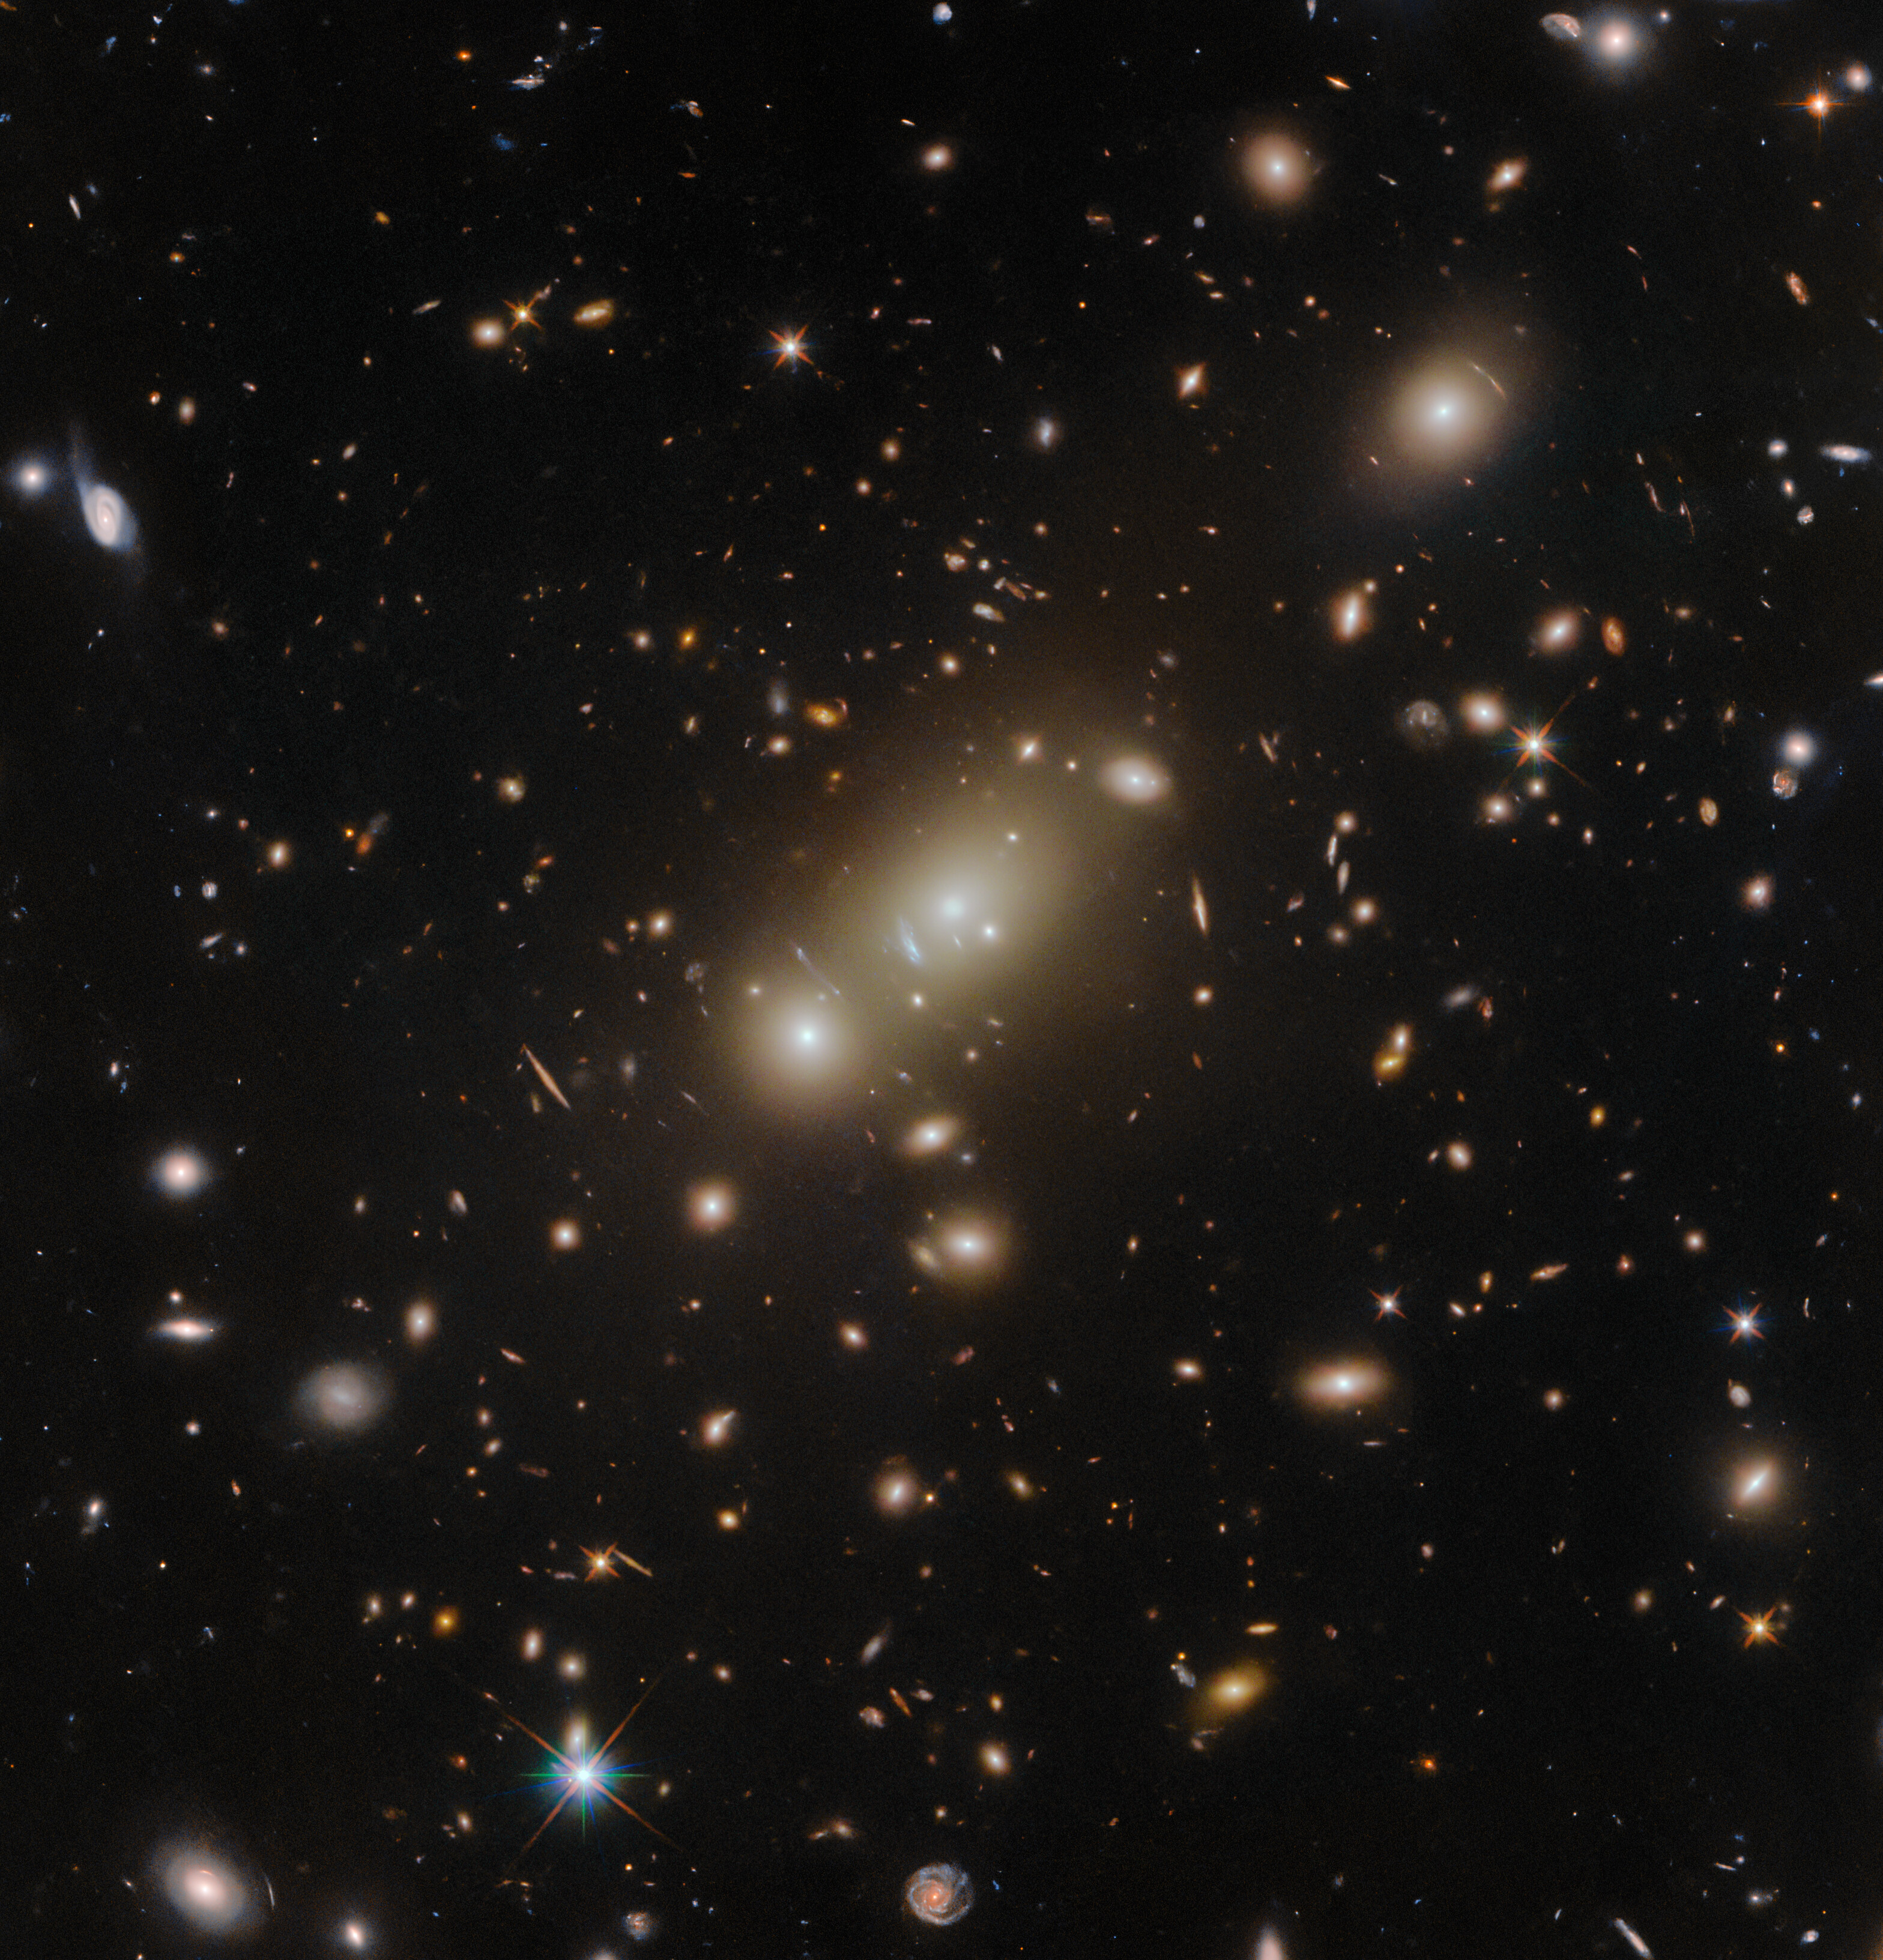 A cluster of elliptical galaxies, visible as a crowd of oval shapes, each glowing around a bright core. The elliptical galaxy that appears largest by far is in the center, with the other largest galaxies close to it. They are surrounded by a variety of more distant stars and galaxies, in many shapes and sizes but all much smaller, on a dark background.